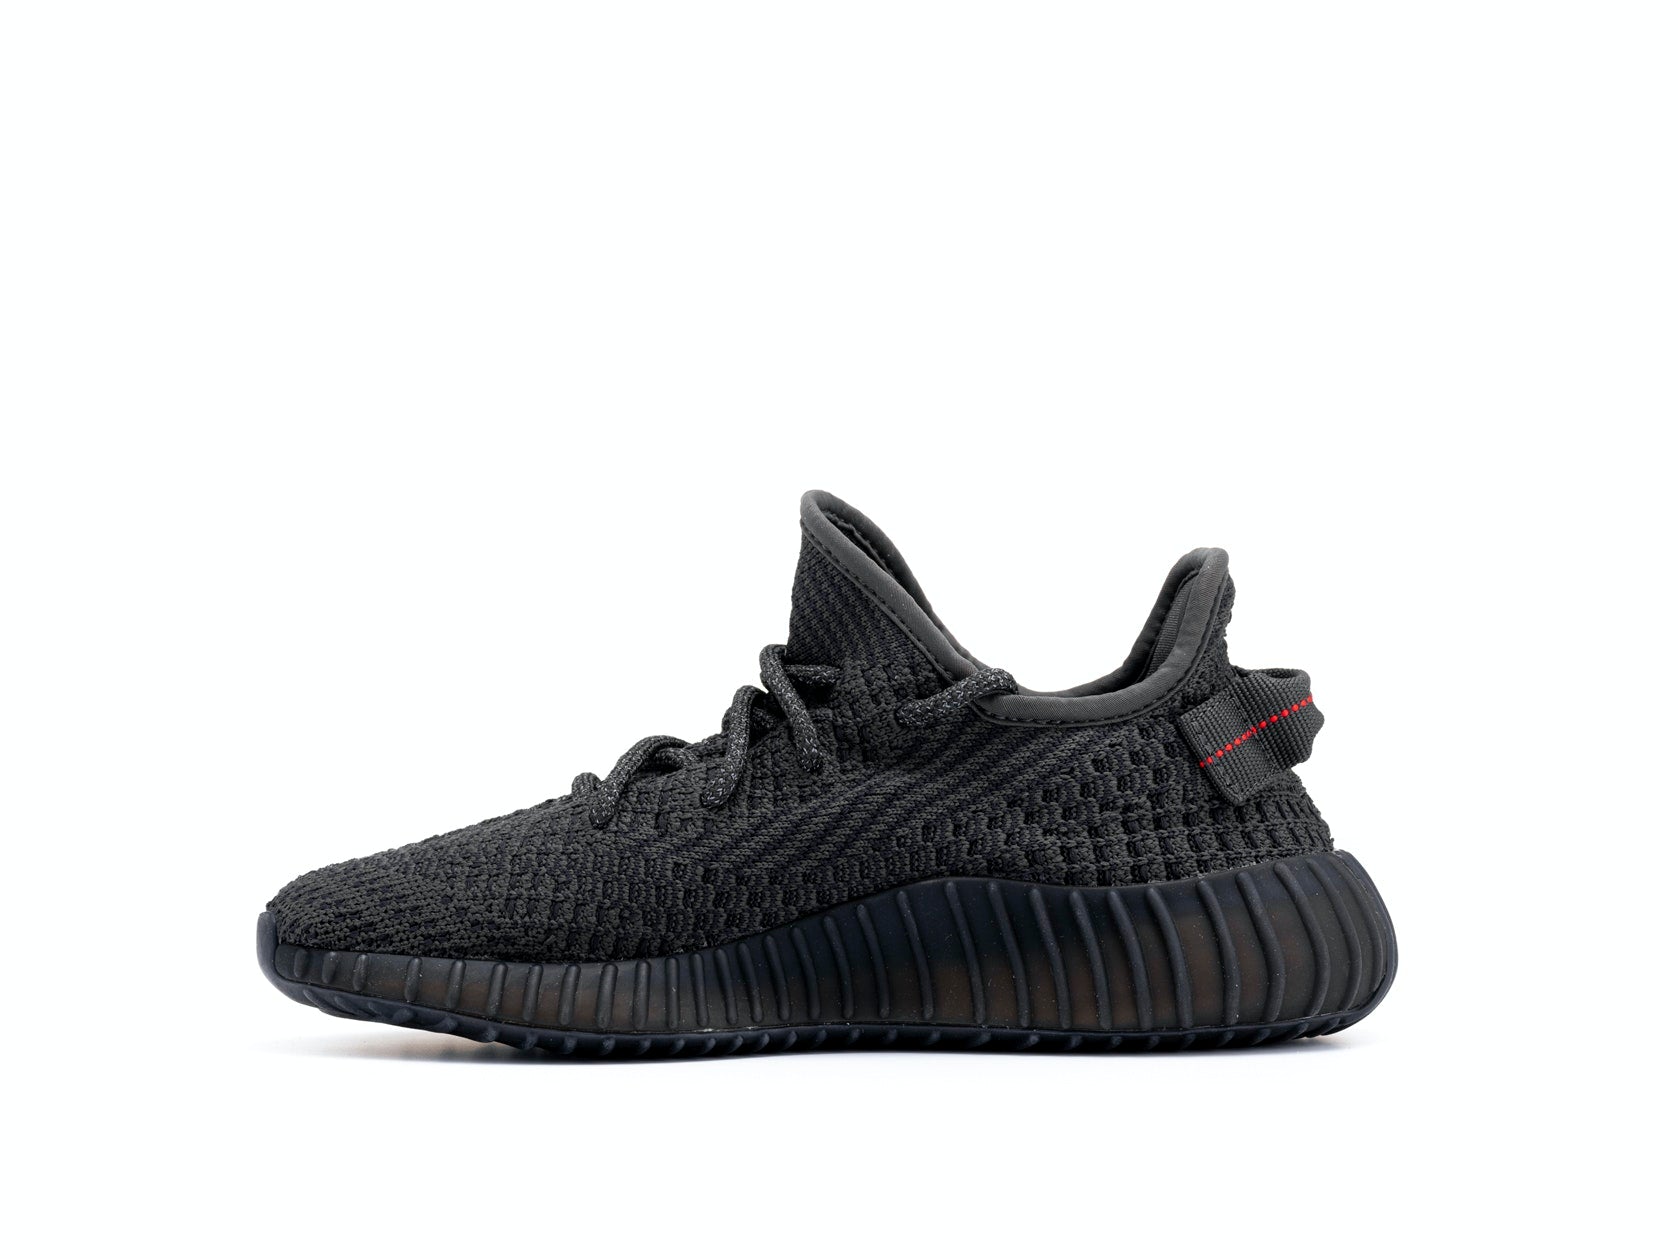 Double Boxed  599.99 adidas Yeezy Boost 350 V2 Black (Non-Reflective) Double Boxed